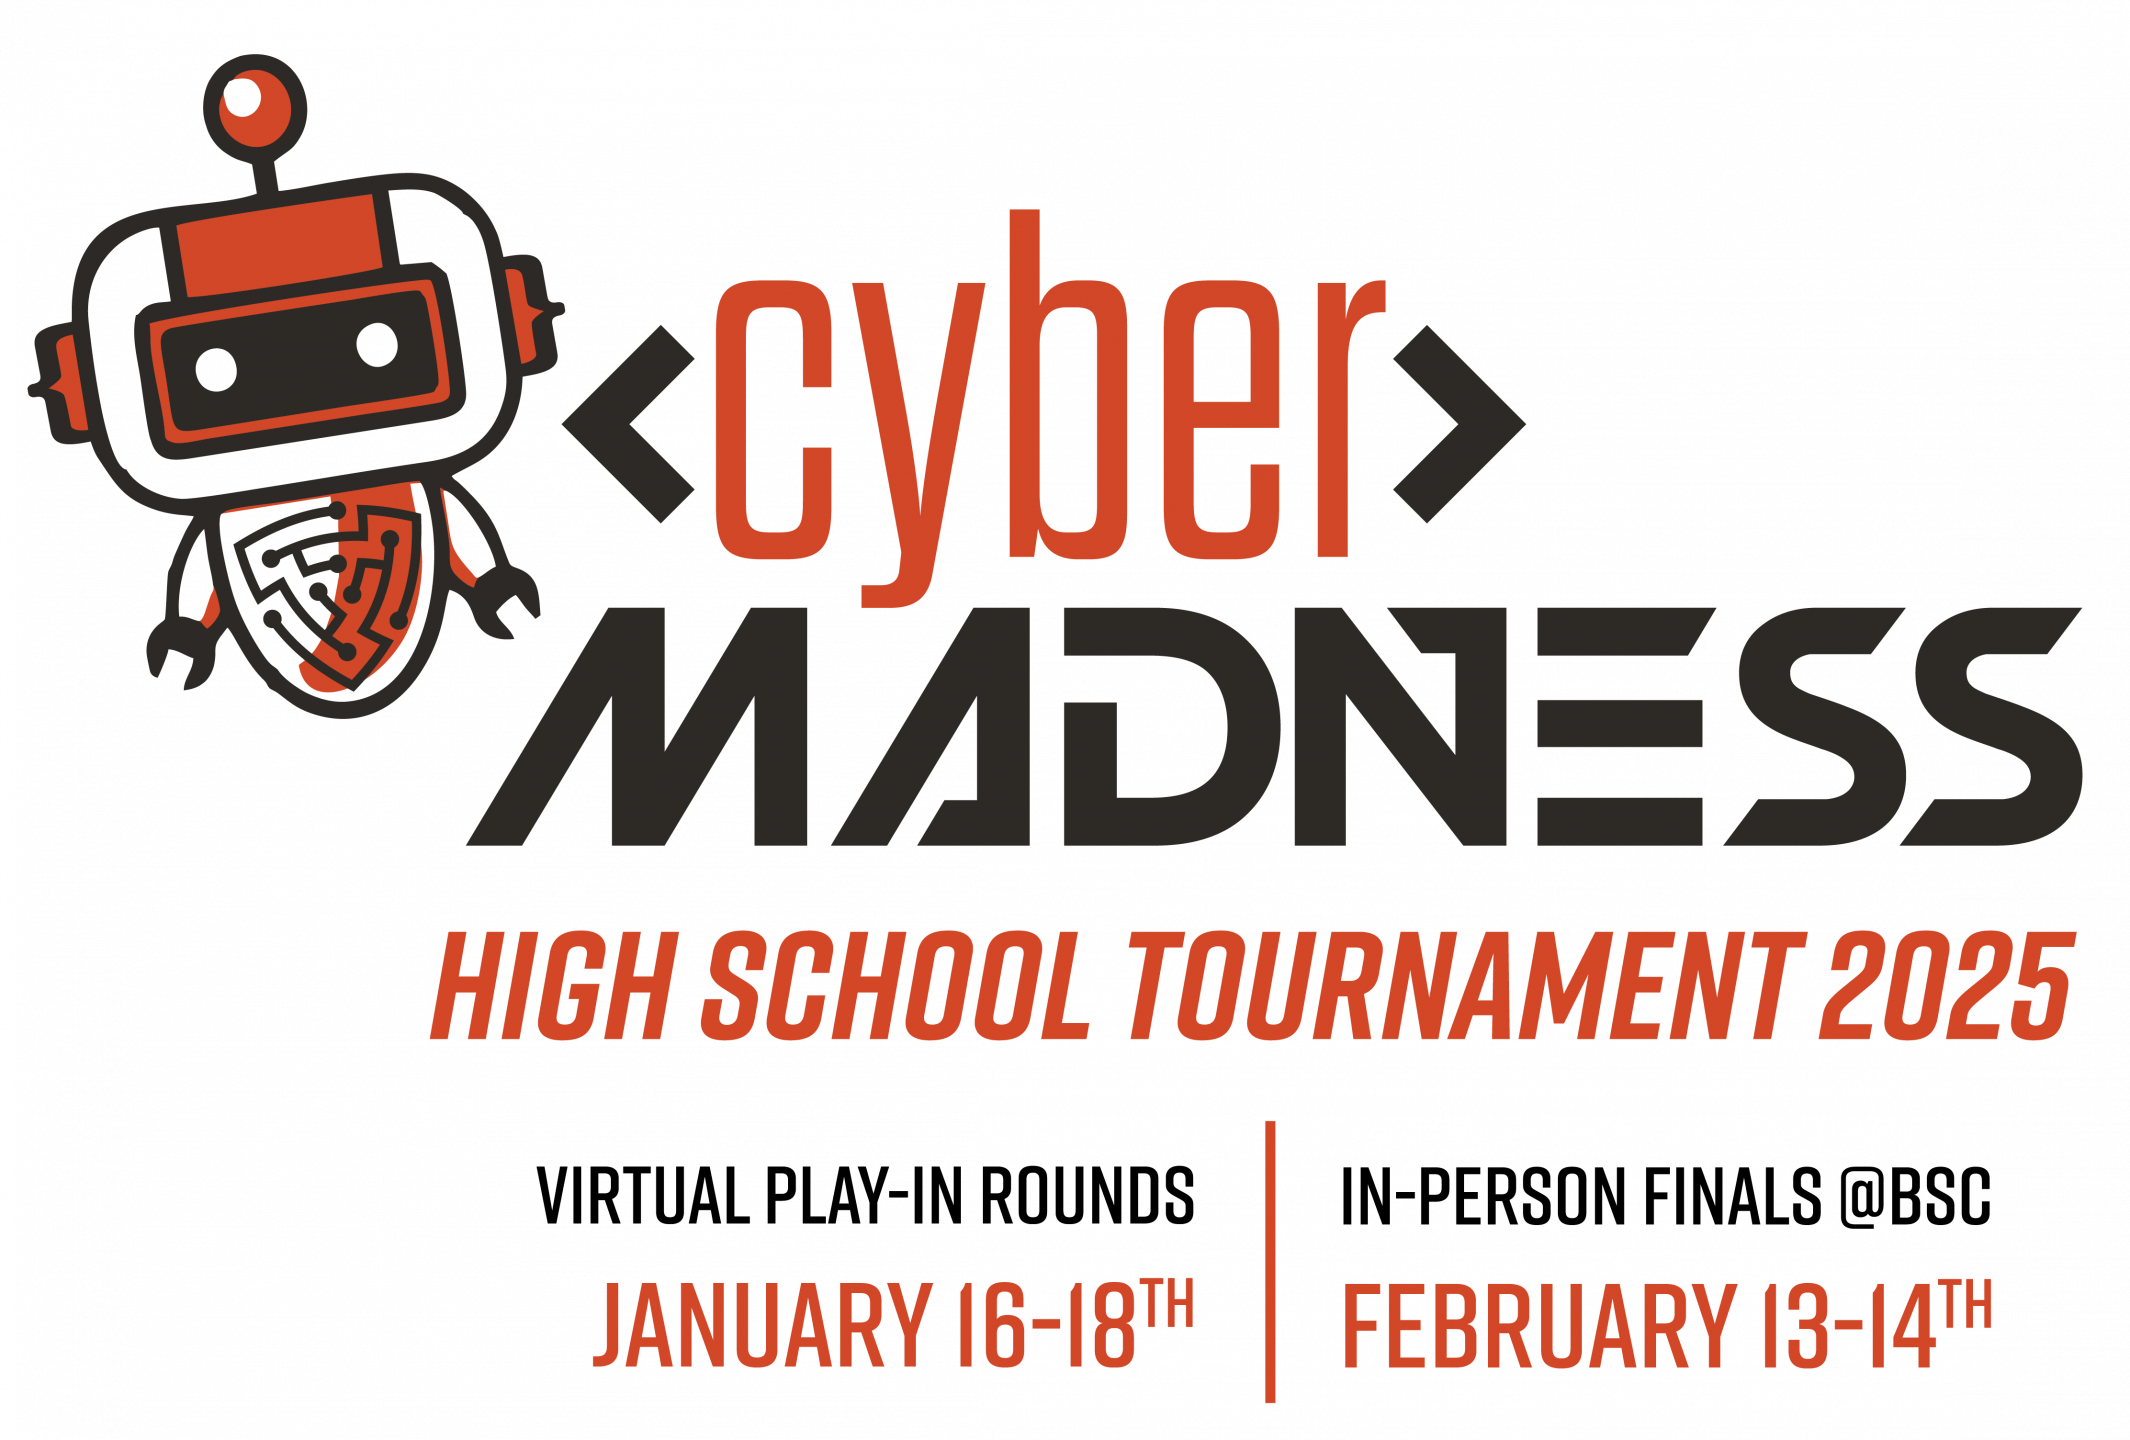 Cyber Madness High School Tournament 2025 virtual play in rounds january 16th-18th and In-person finals February 13-14th at Bismarck State College